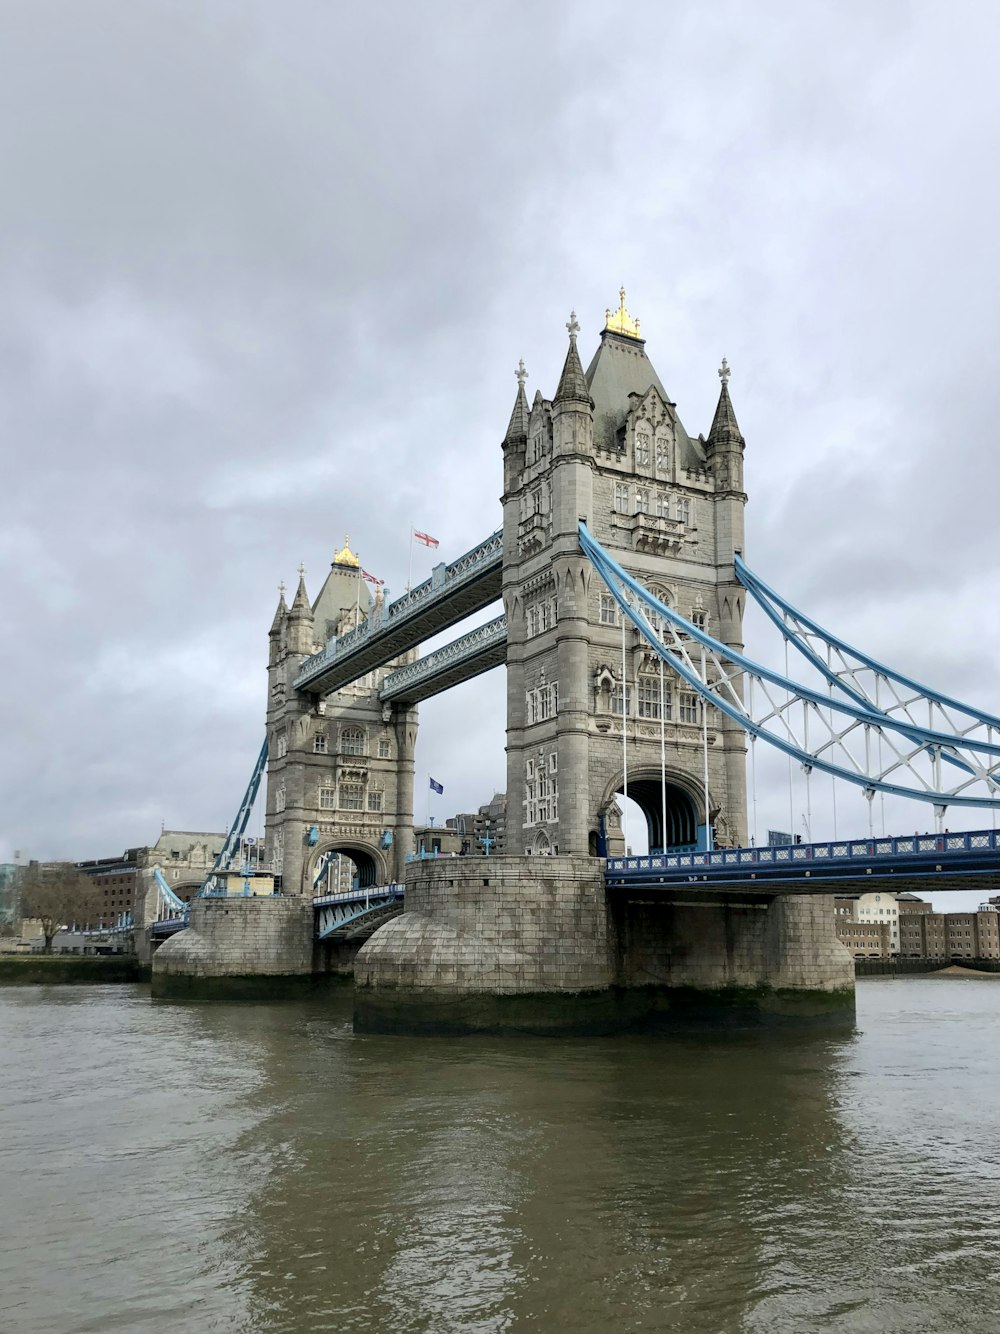 a bridge that has a tower with a clock on it